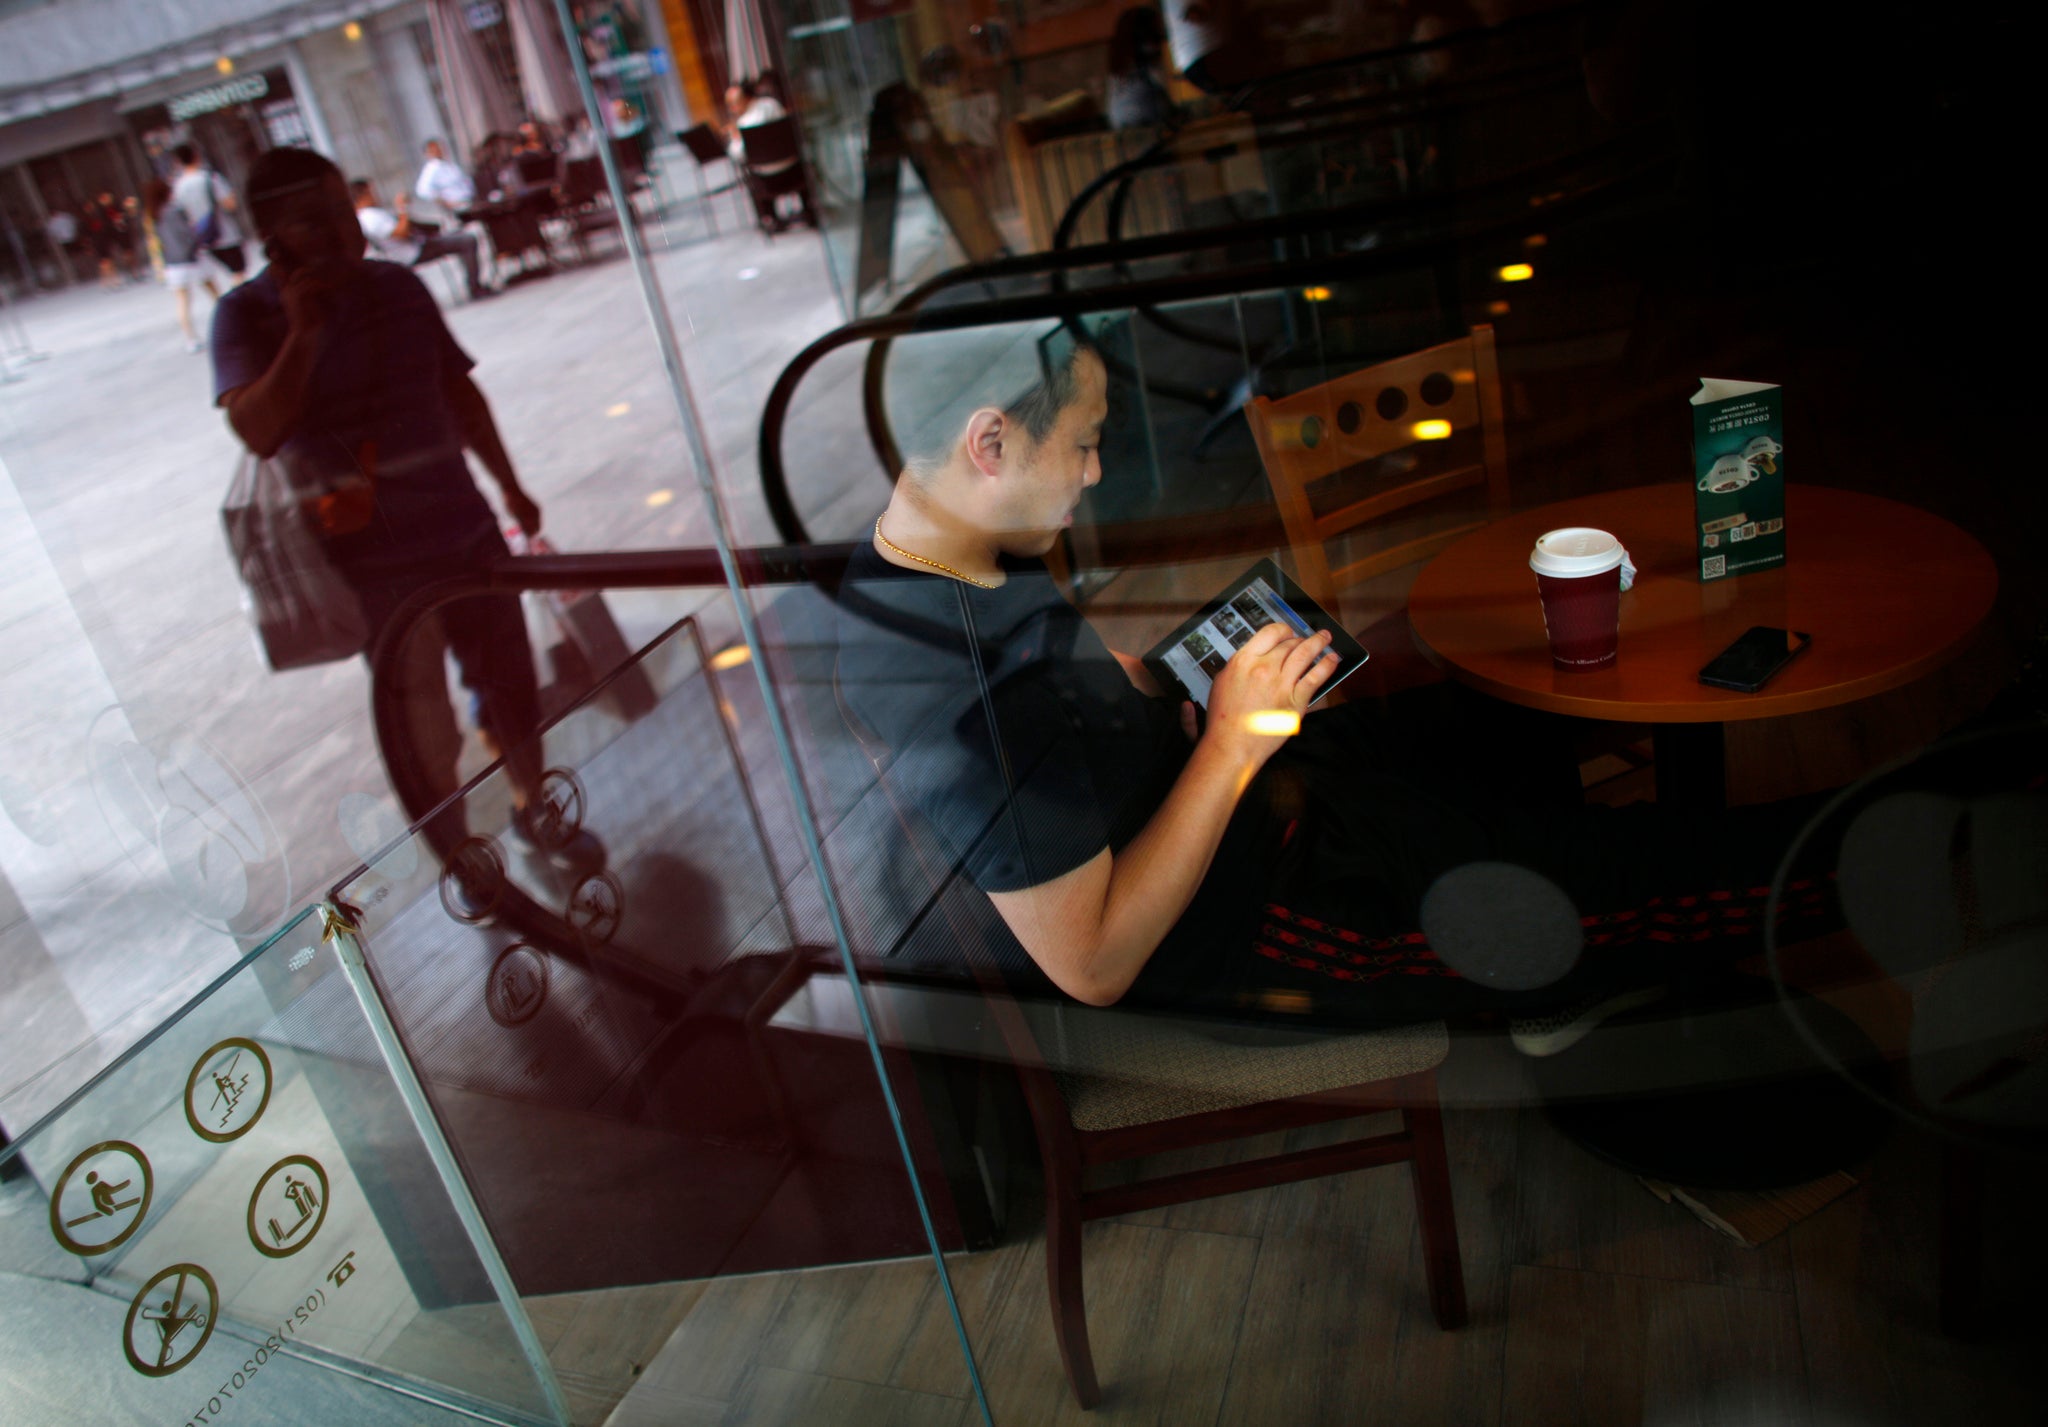 A man surfs the Internet on his tablet device at a coffee shop in downtown Shanghai, 2013.